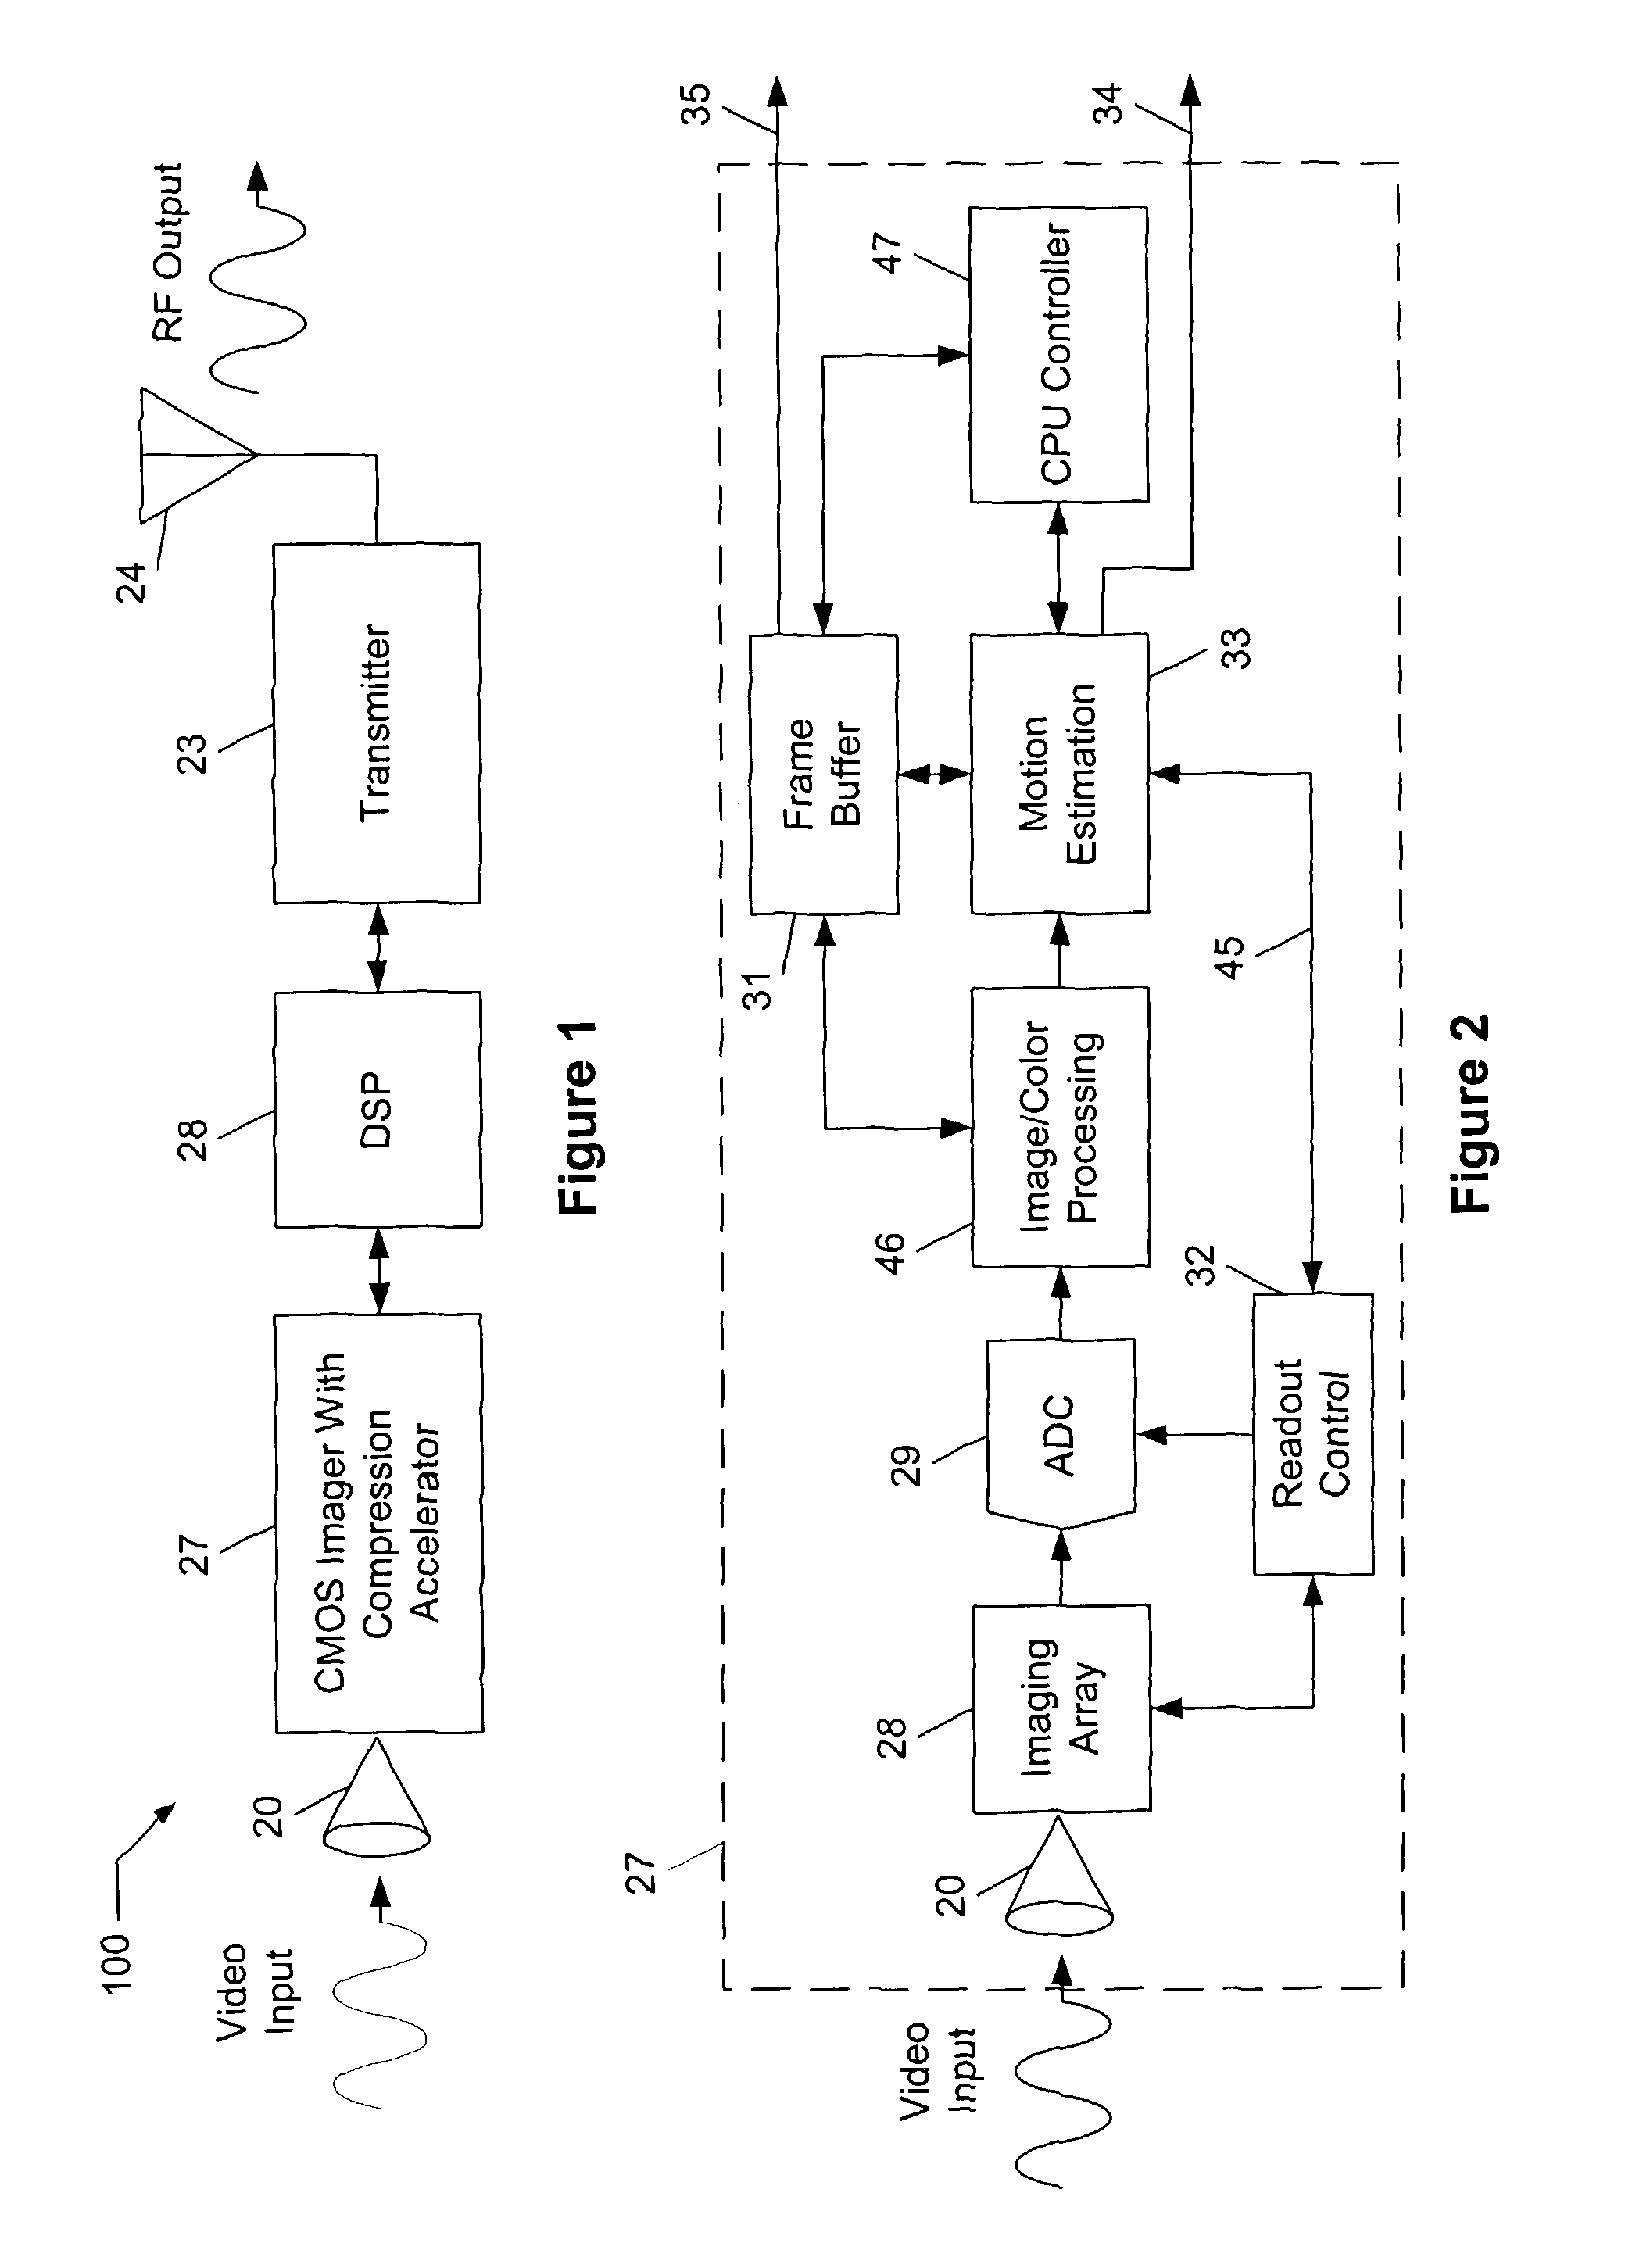 Systems and methods for utilizing activity detection information in relation to image processing